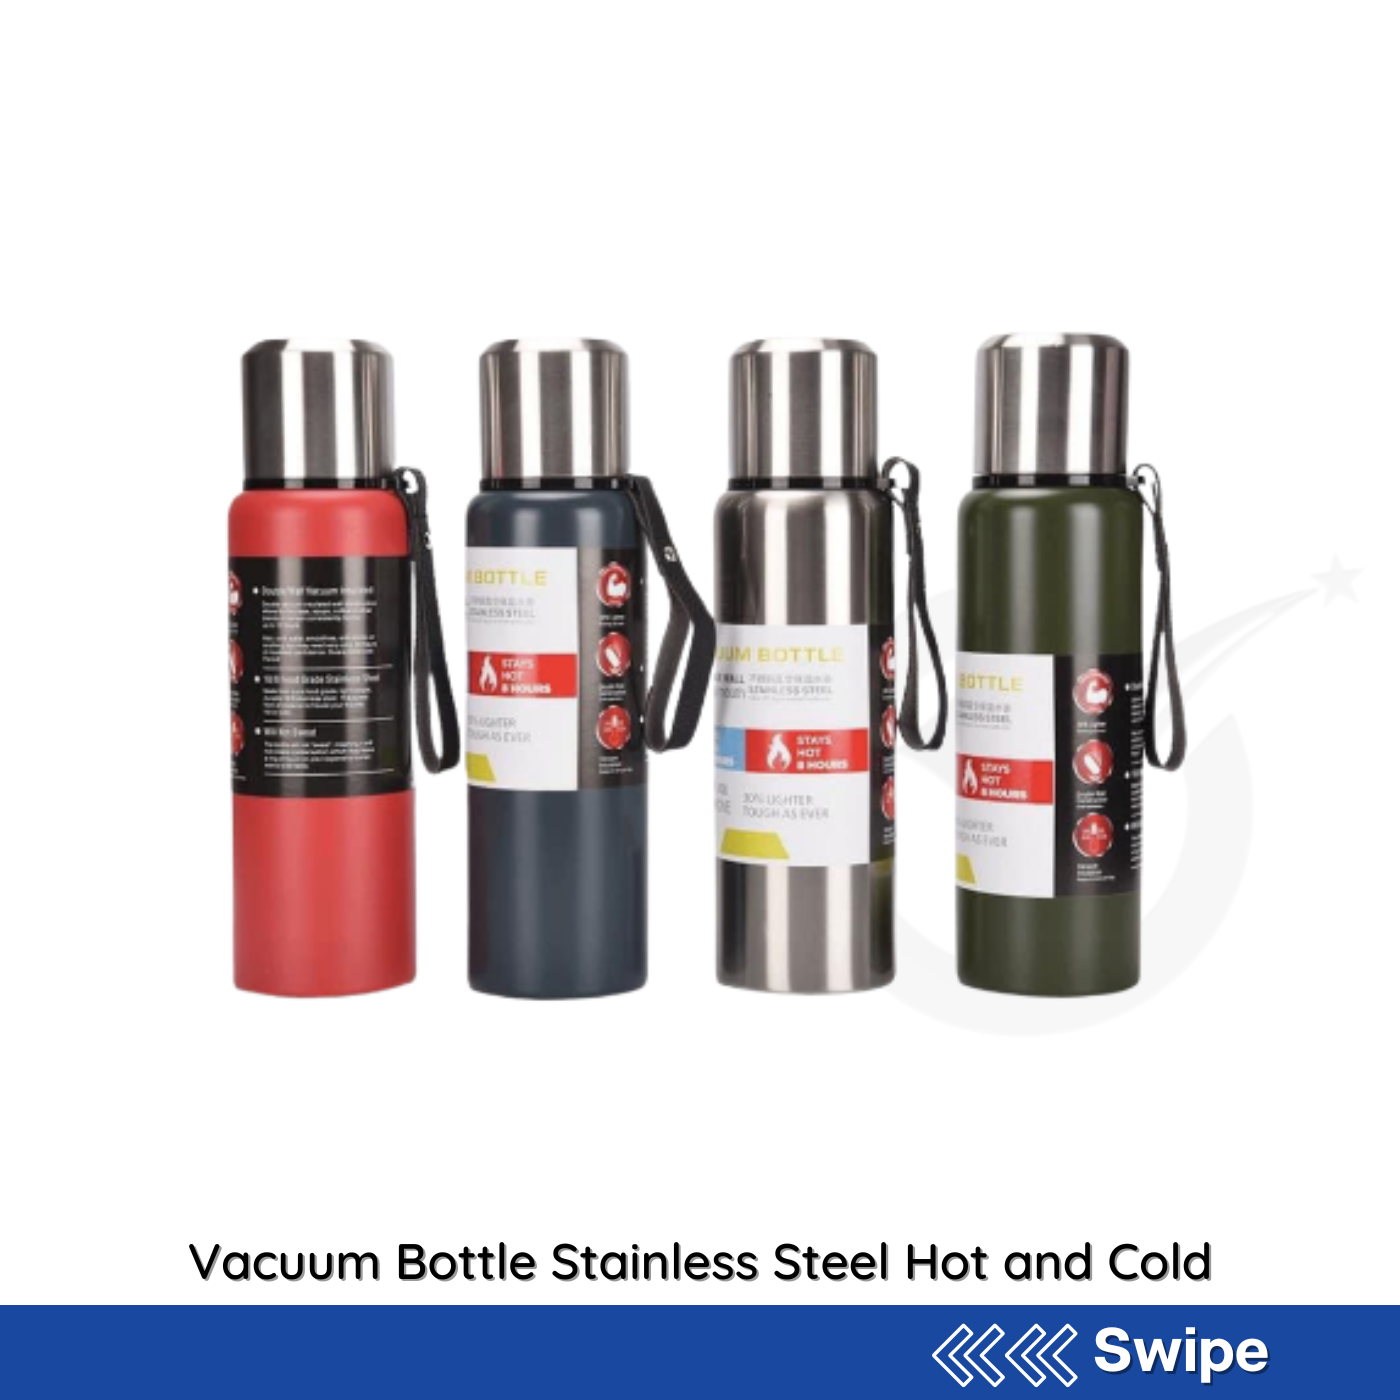 Vacuum Bottle Stainless Steel Hot and Cold